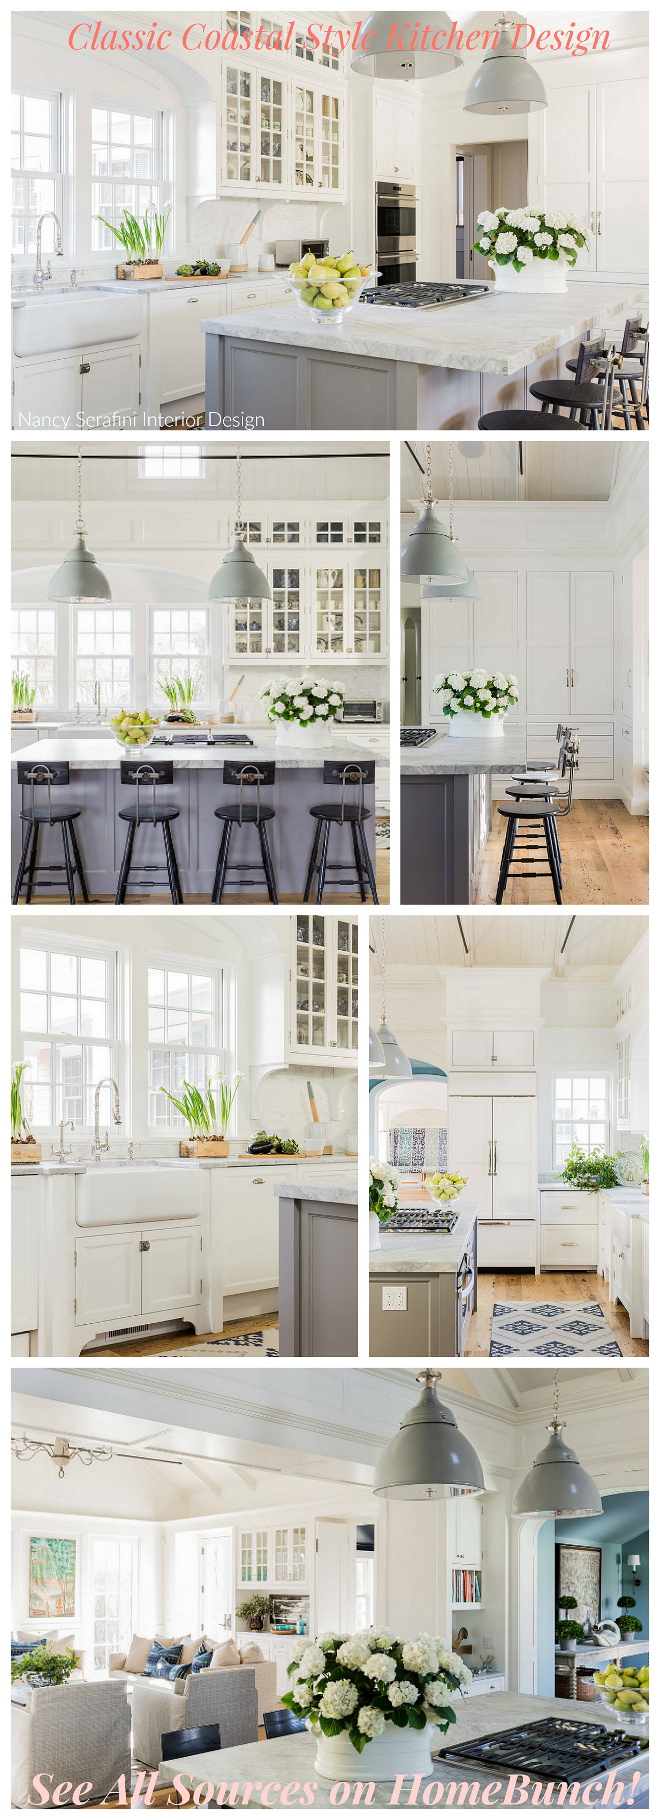 Classic Coastal Style Kitchen Design. See all sources such as paint colors, lighting, countertop, hardware, flooring on HomeBunch